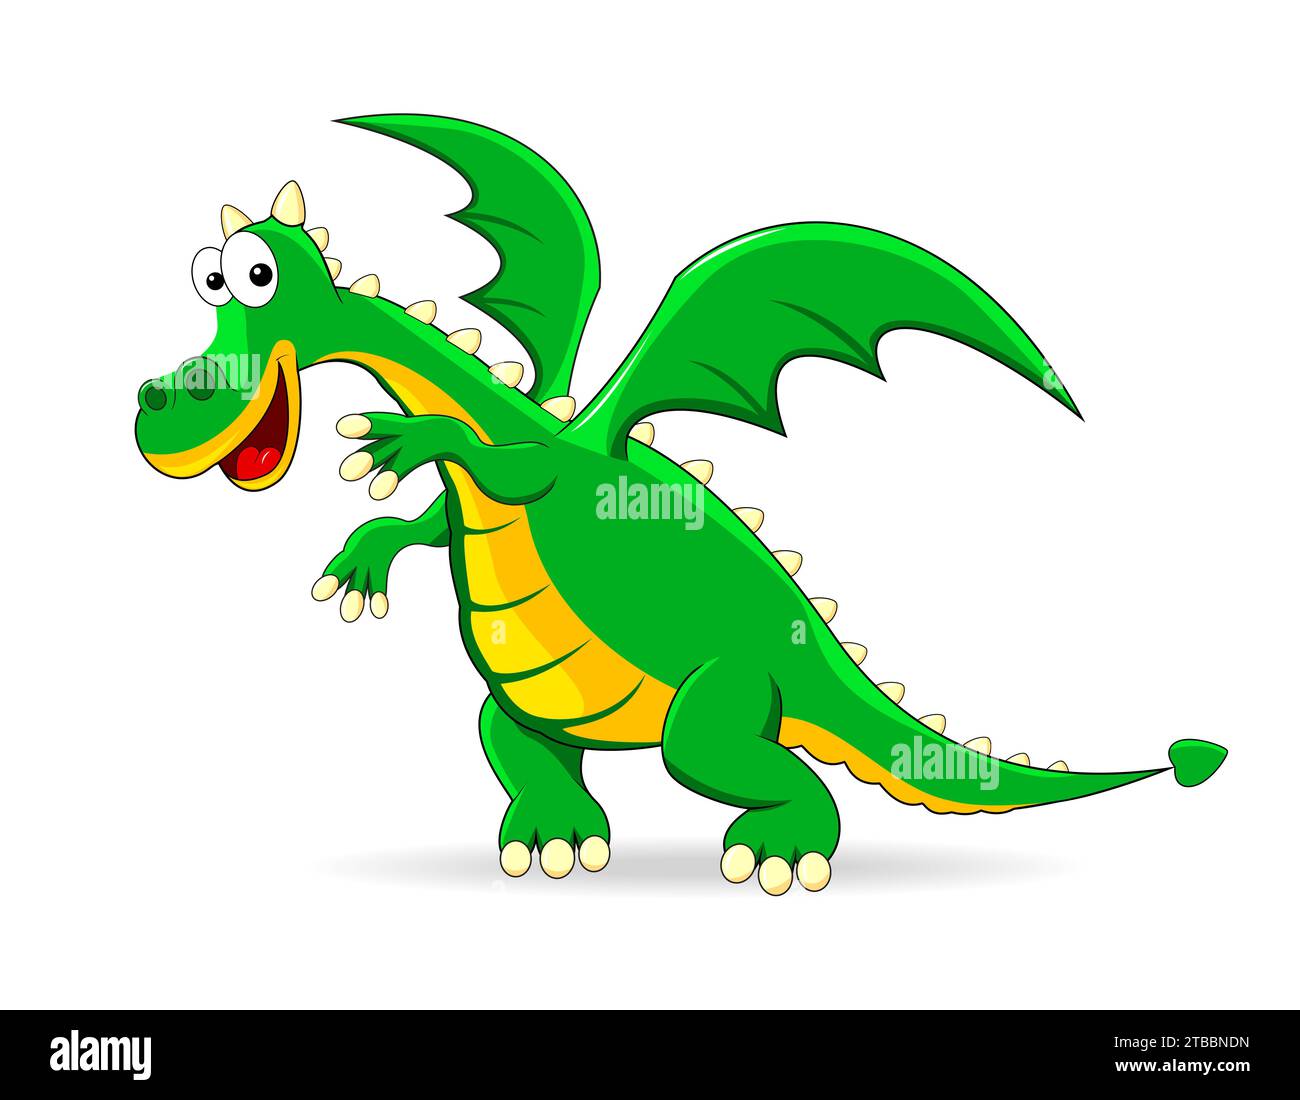 Green dragon on a white background. Funny fairy tale character. Green dinosaur. Stock Vector